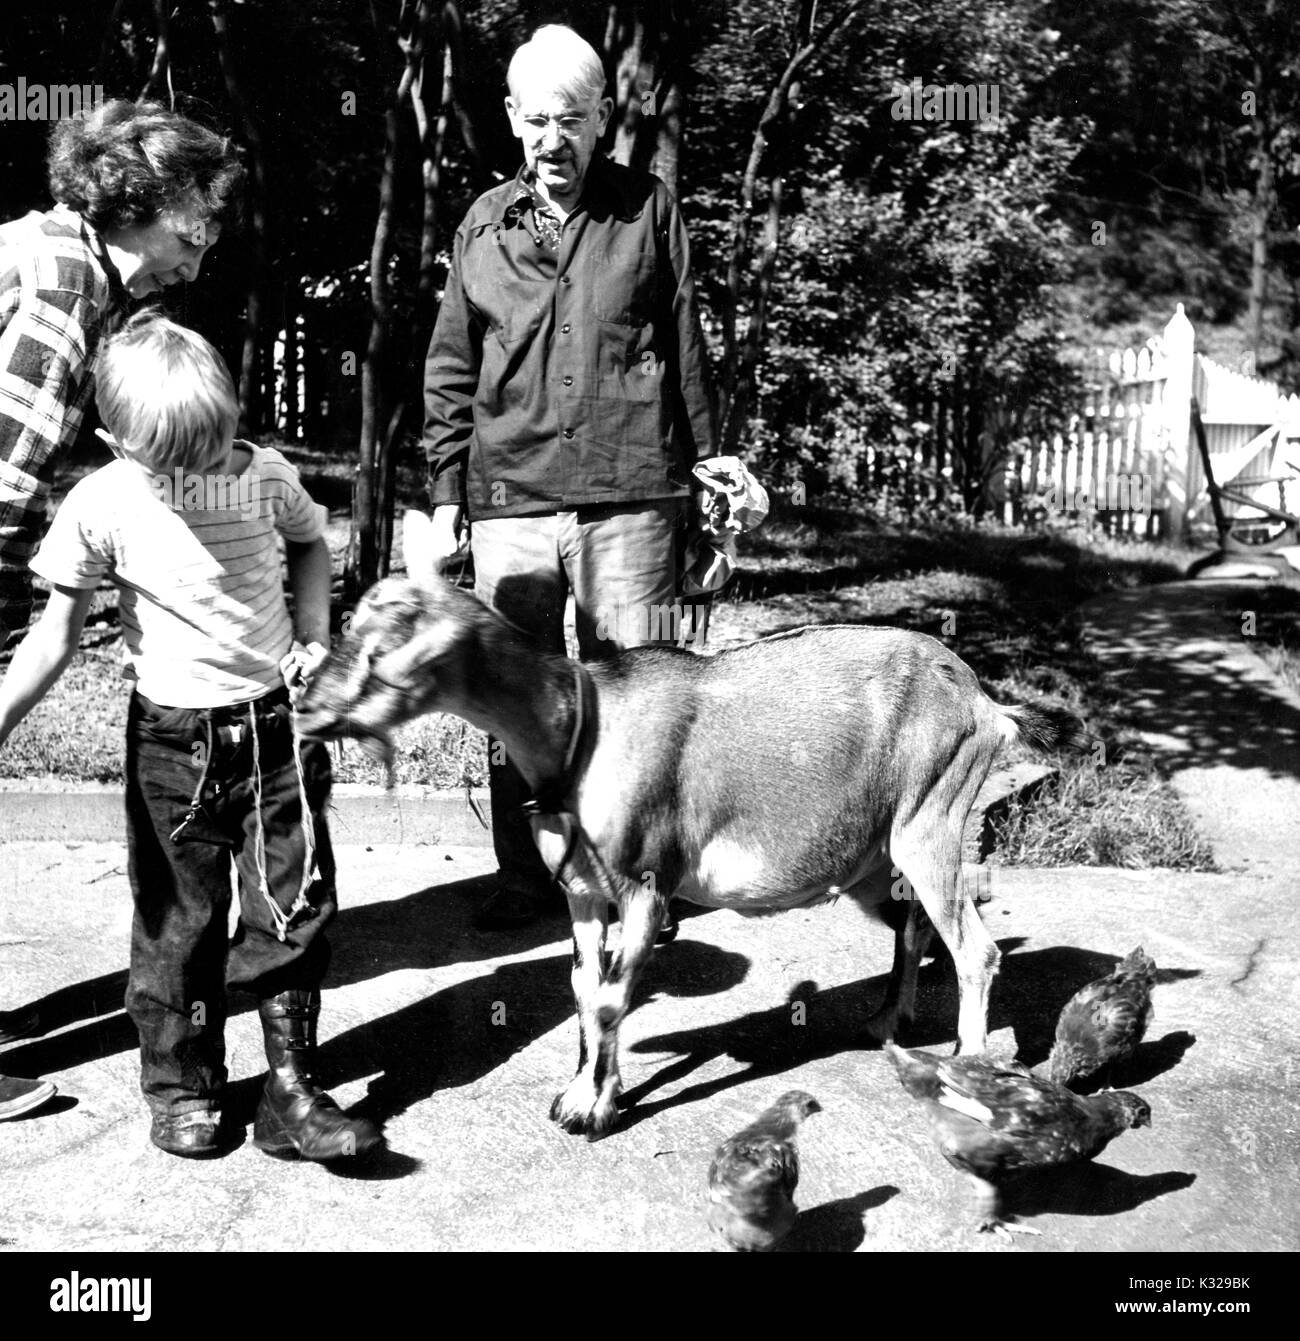 Candid portrait of American philosopher, psychologist, and educational reformer John Dewey standing on a path outside feeding a goat with his wife and son, 1946. Stock Photo